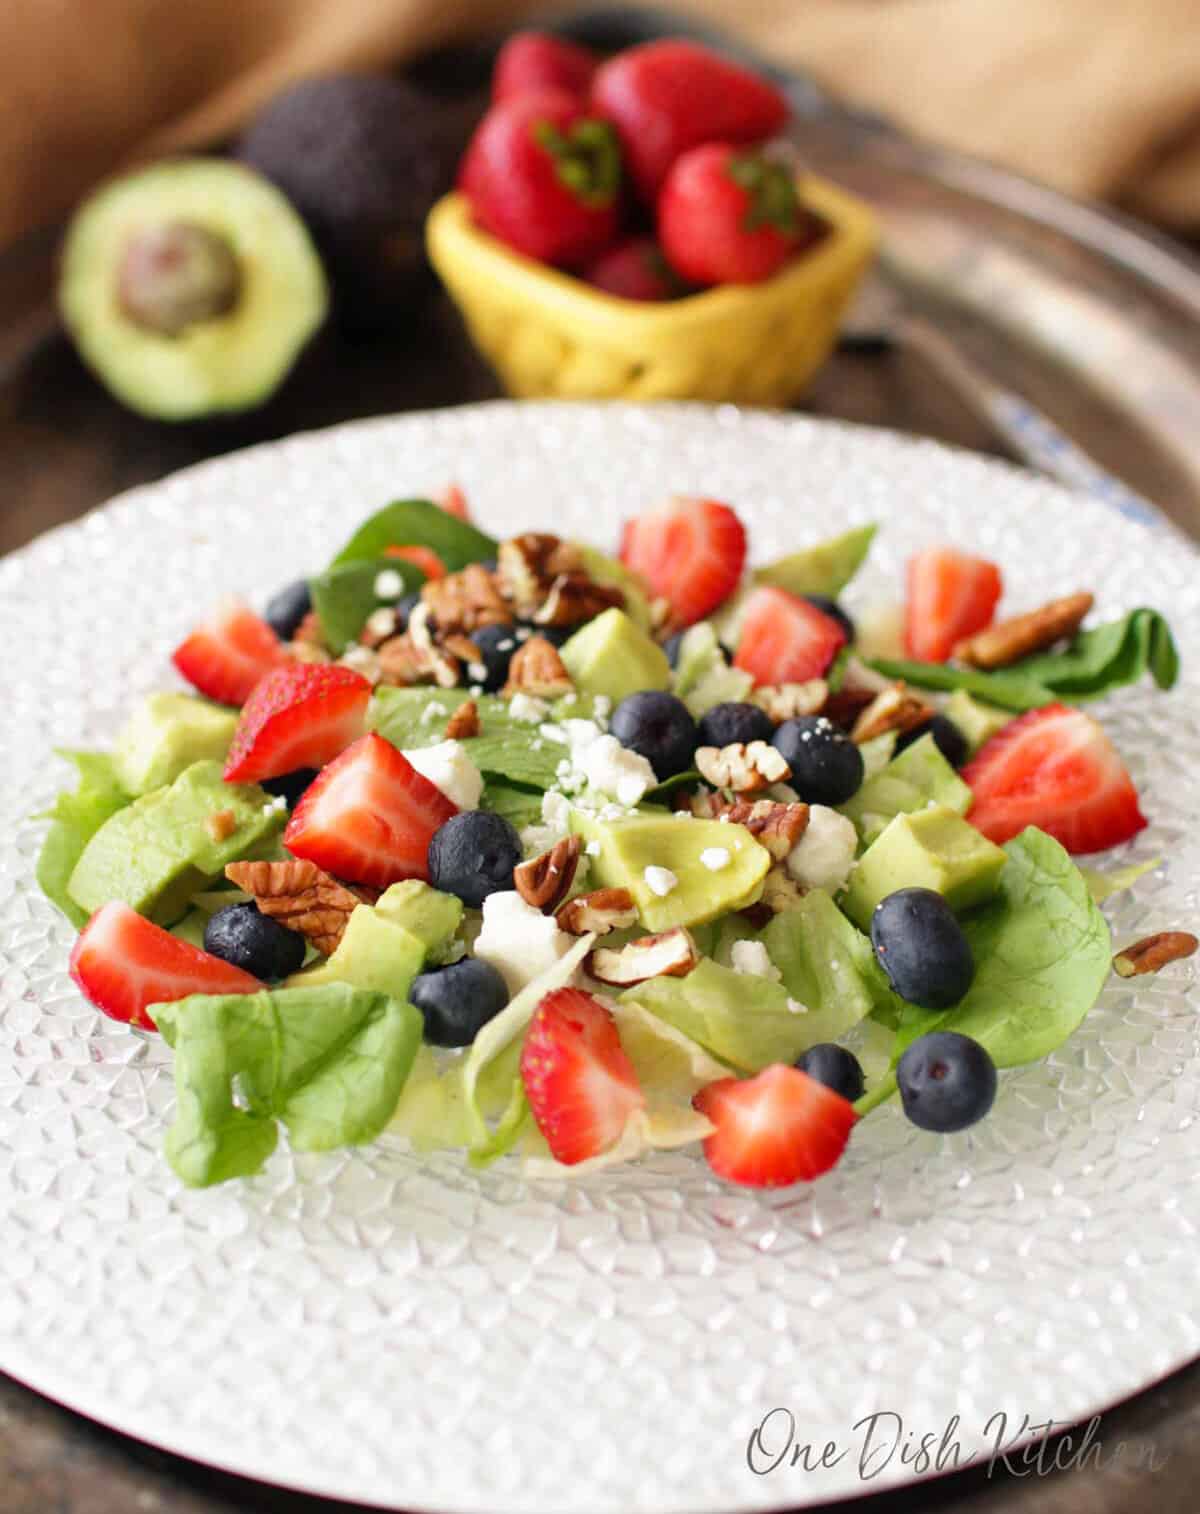 an avocado salad on a plate topped with blueberries and strawberries.